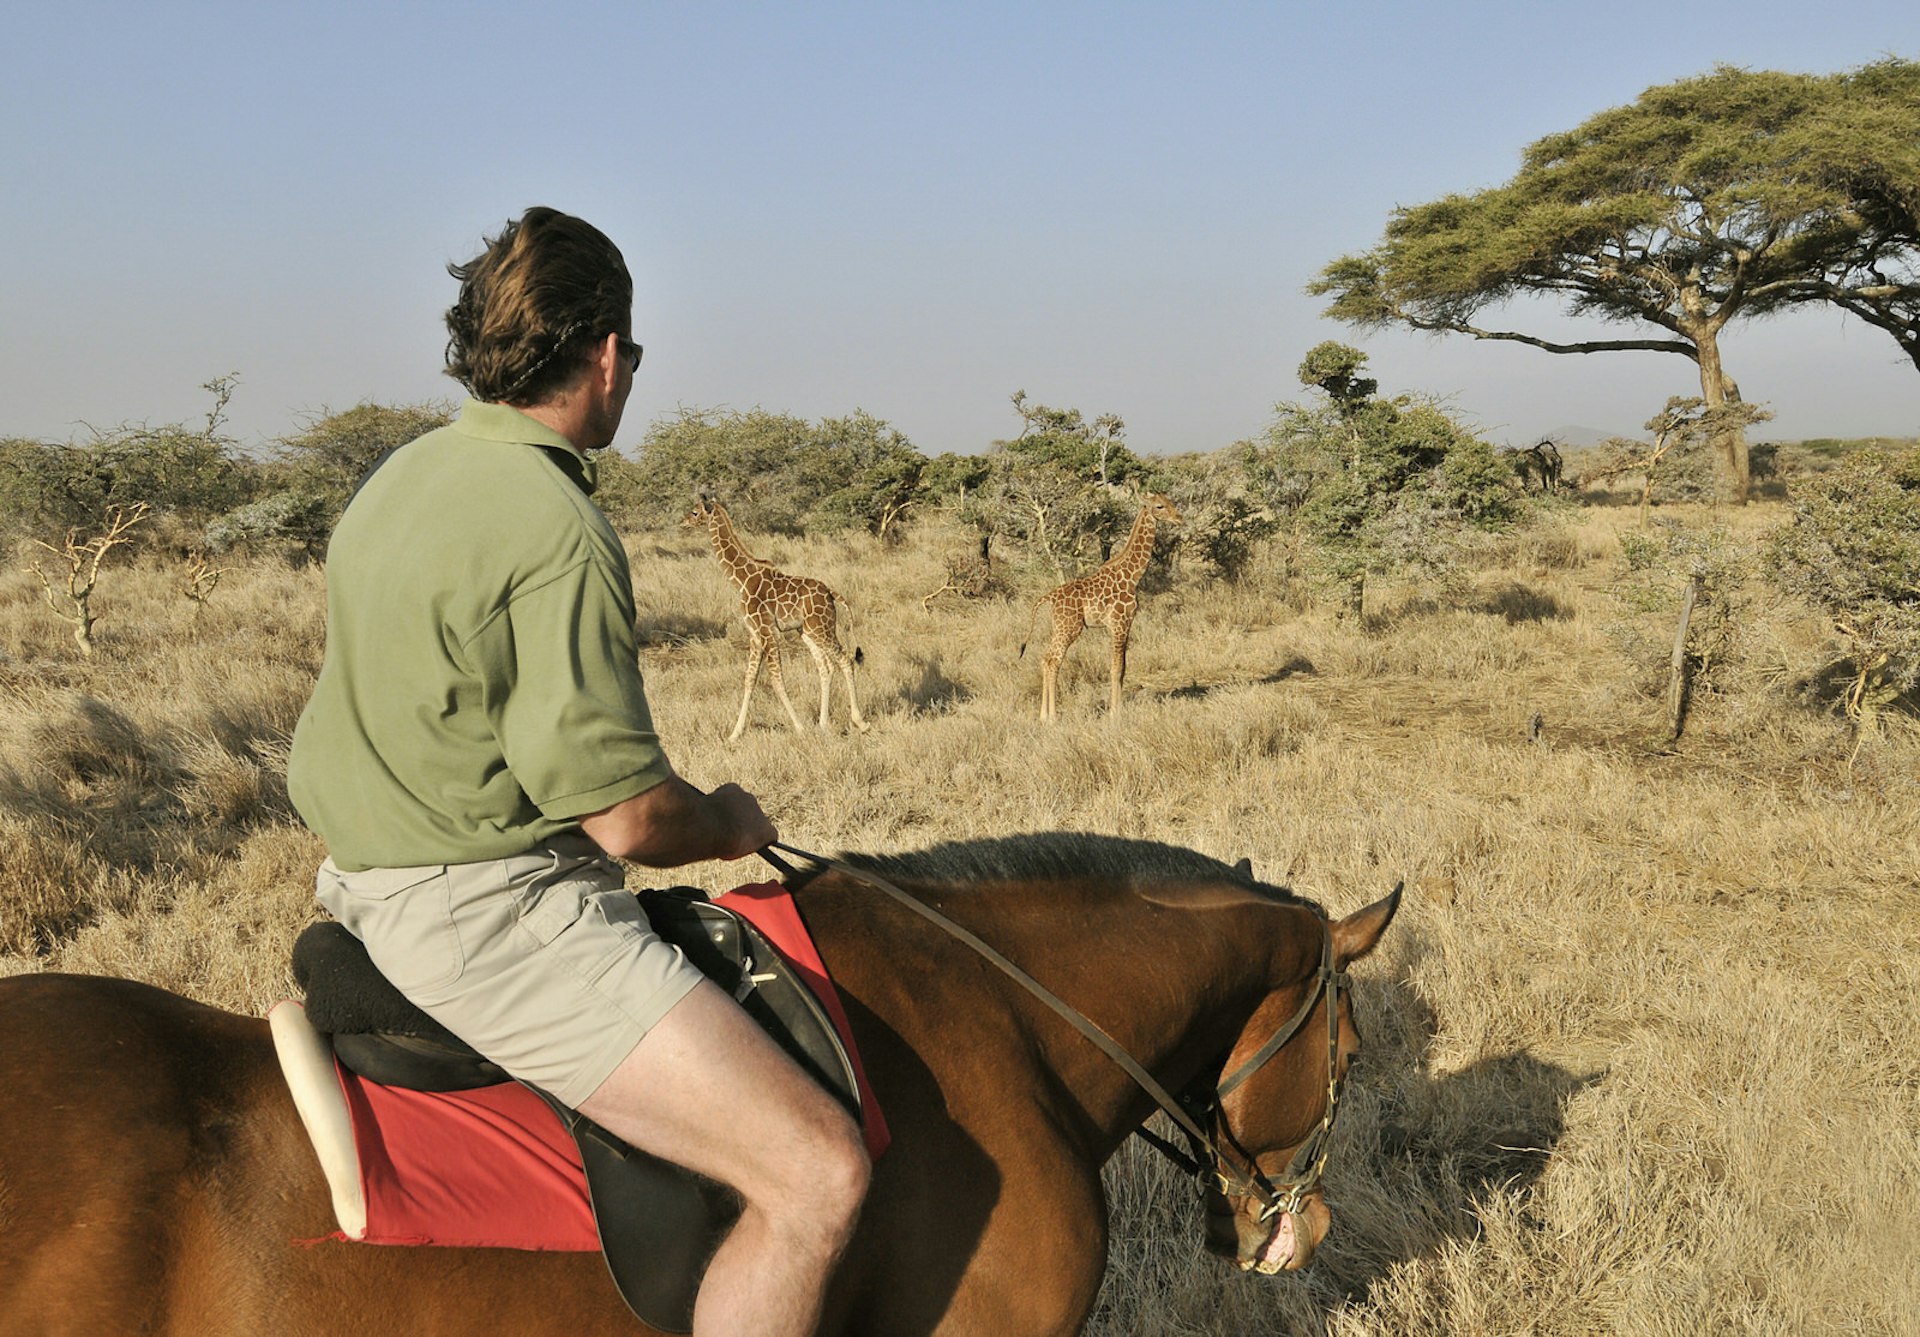 A horseback safari offers a refreshing alternative to the usual 4x4s © Chris Minihane / Getty Images